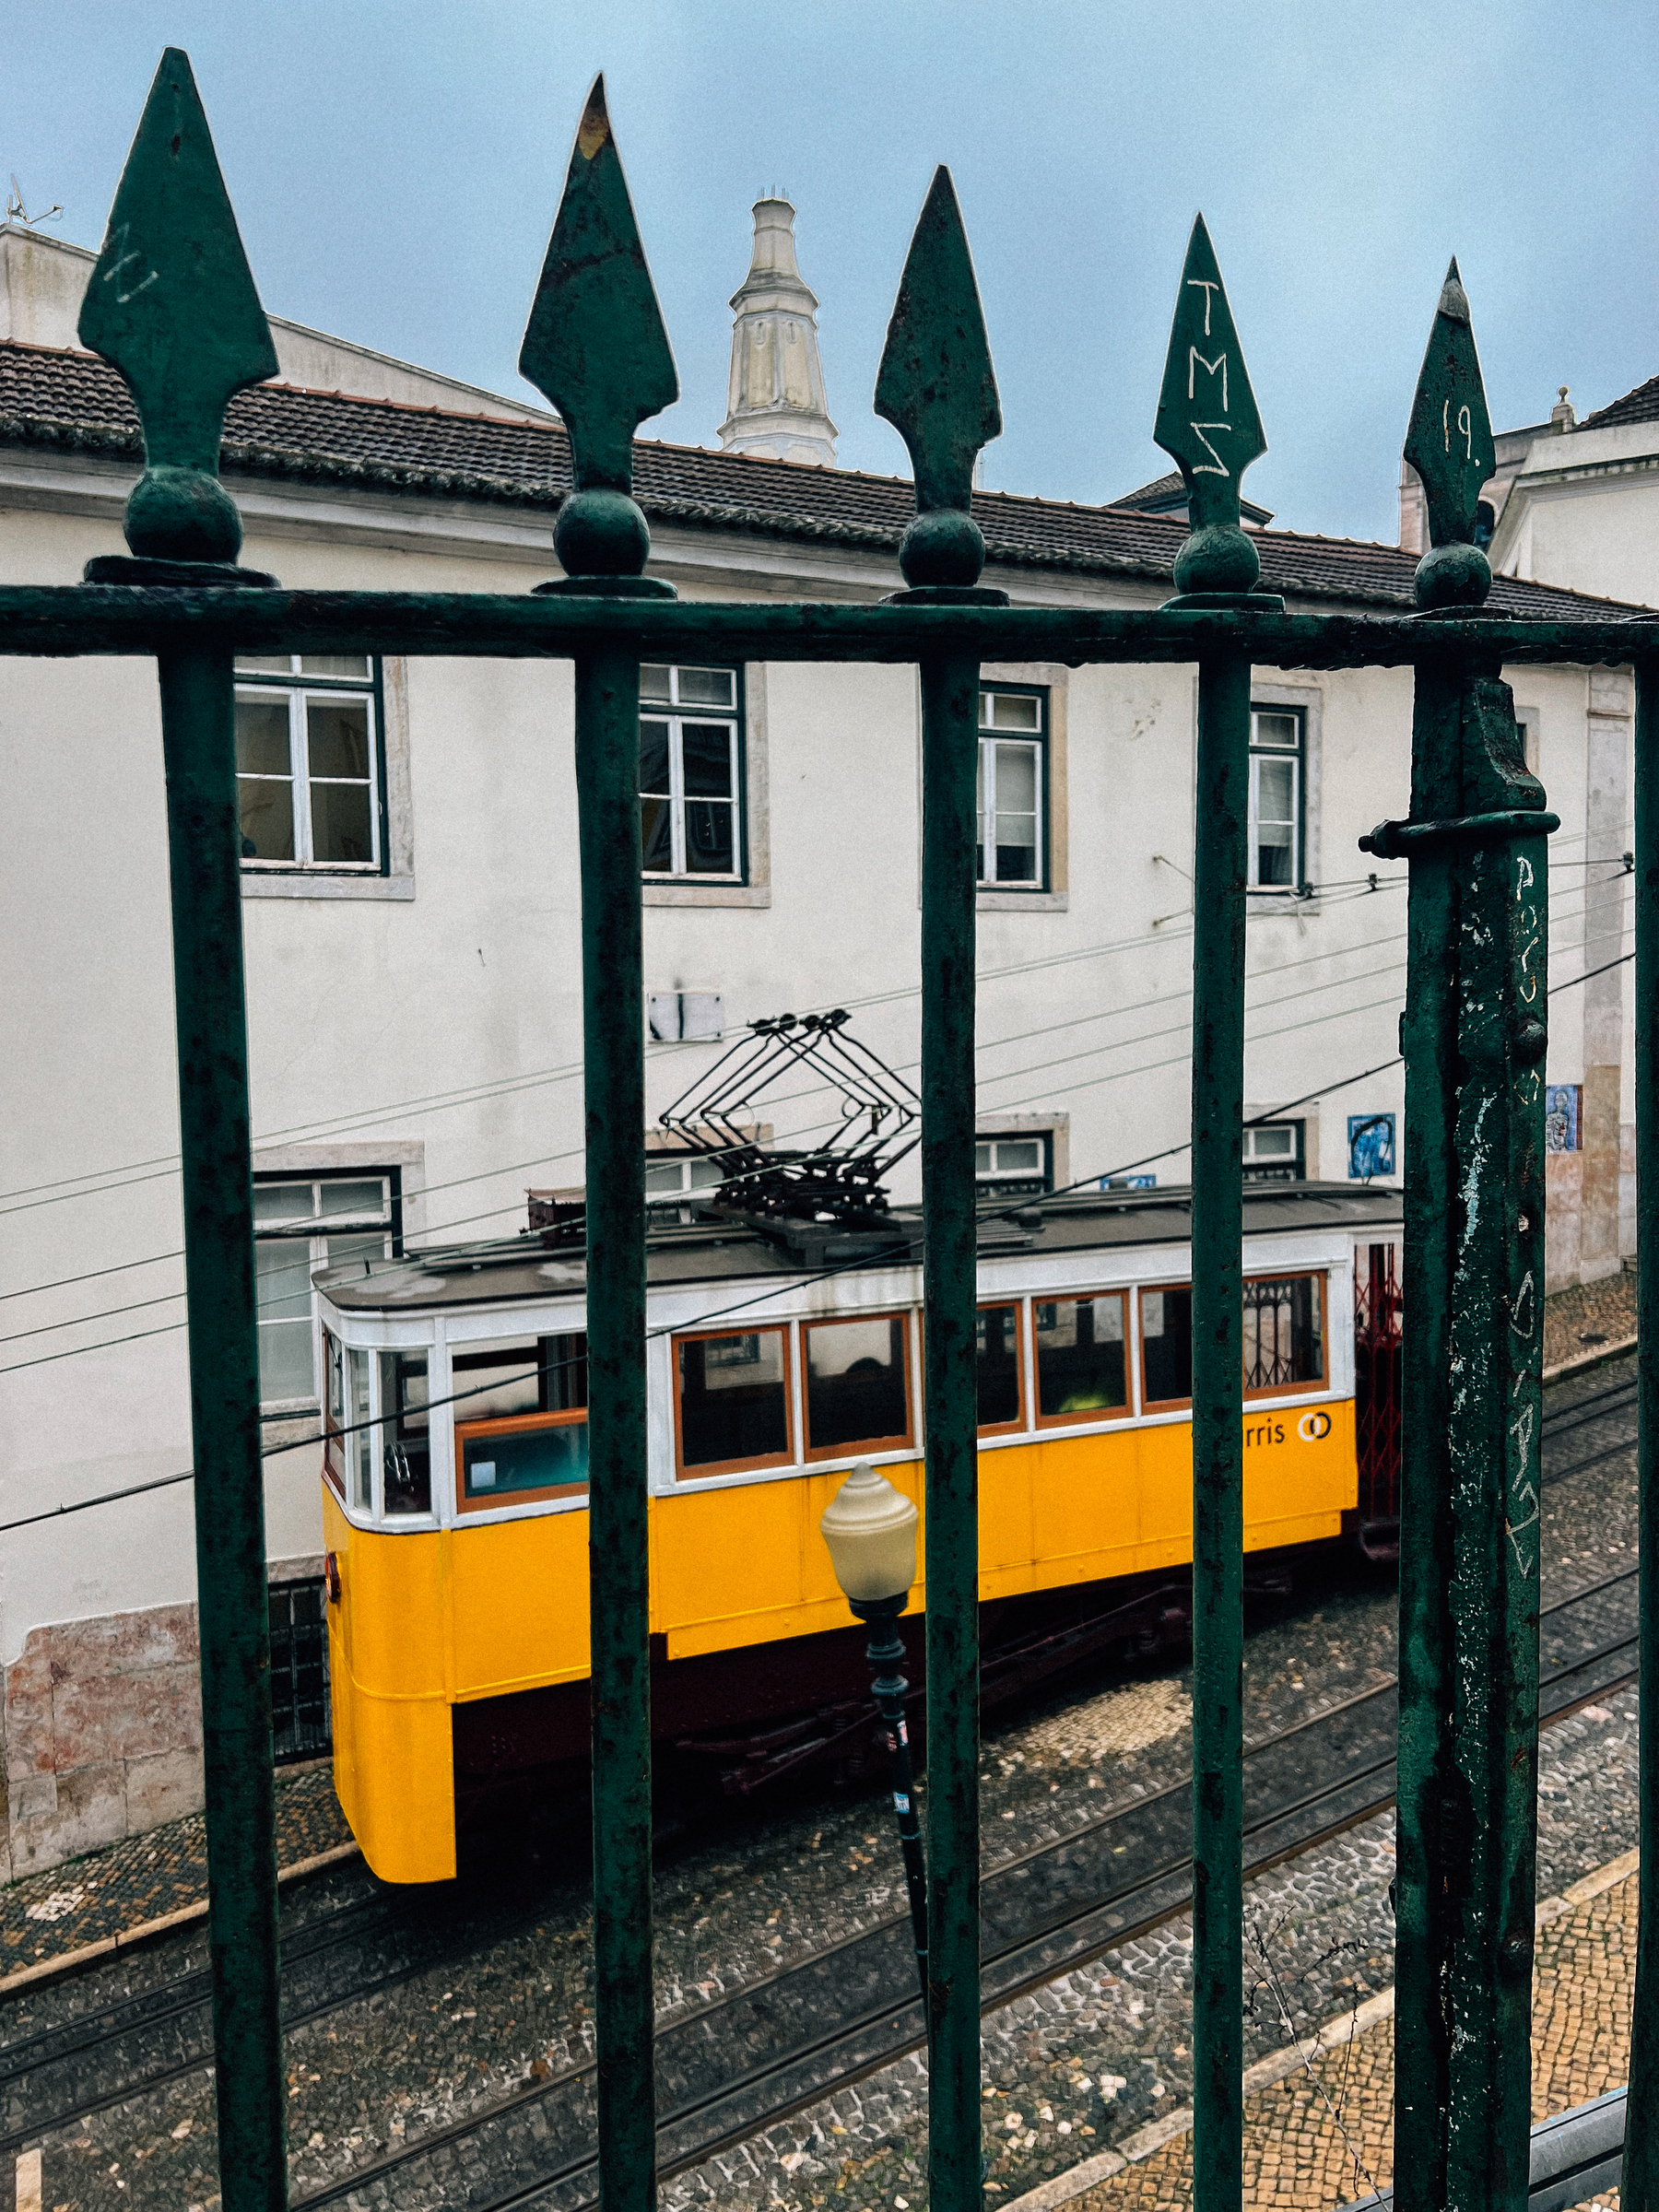 A classic yellow tram seen through a green wrought-iron fence, with traditional architecture and a lamppost in the background.